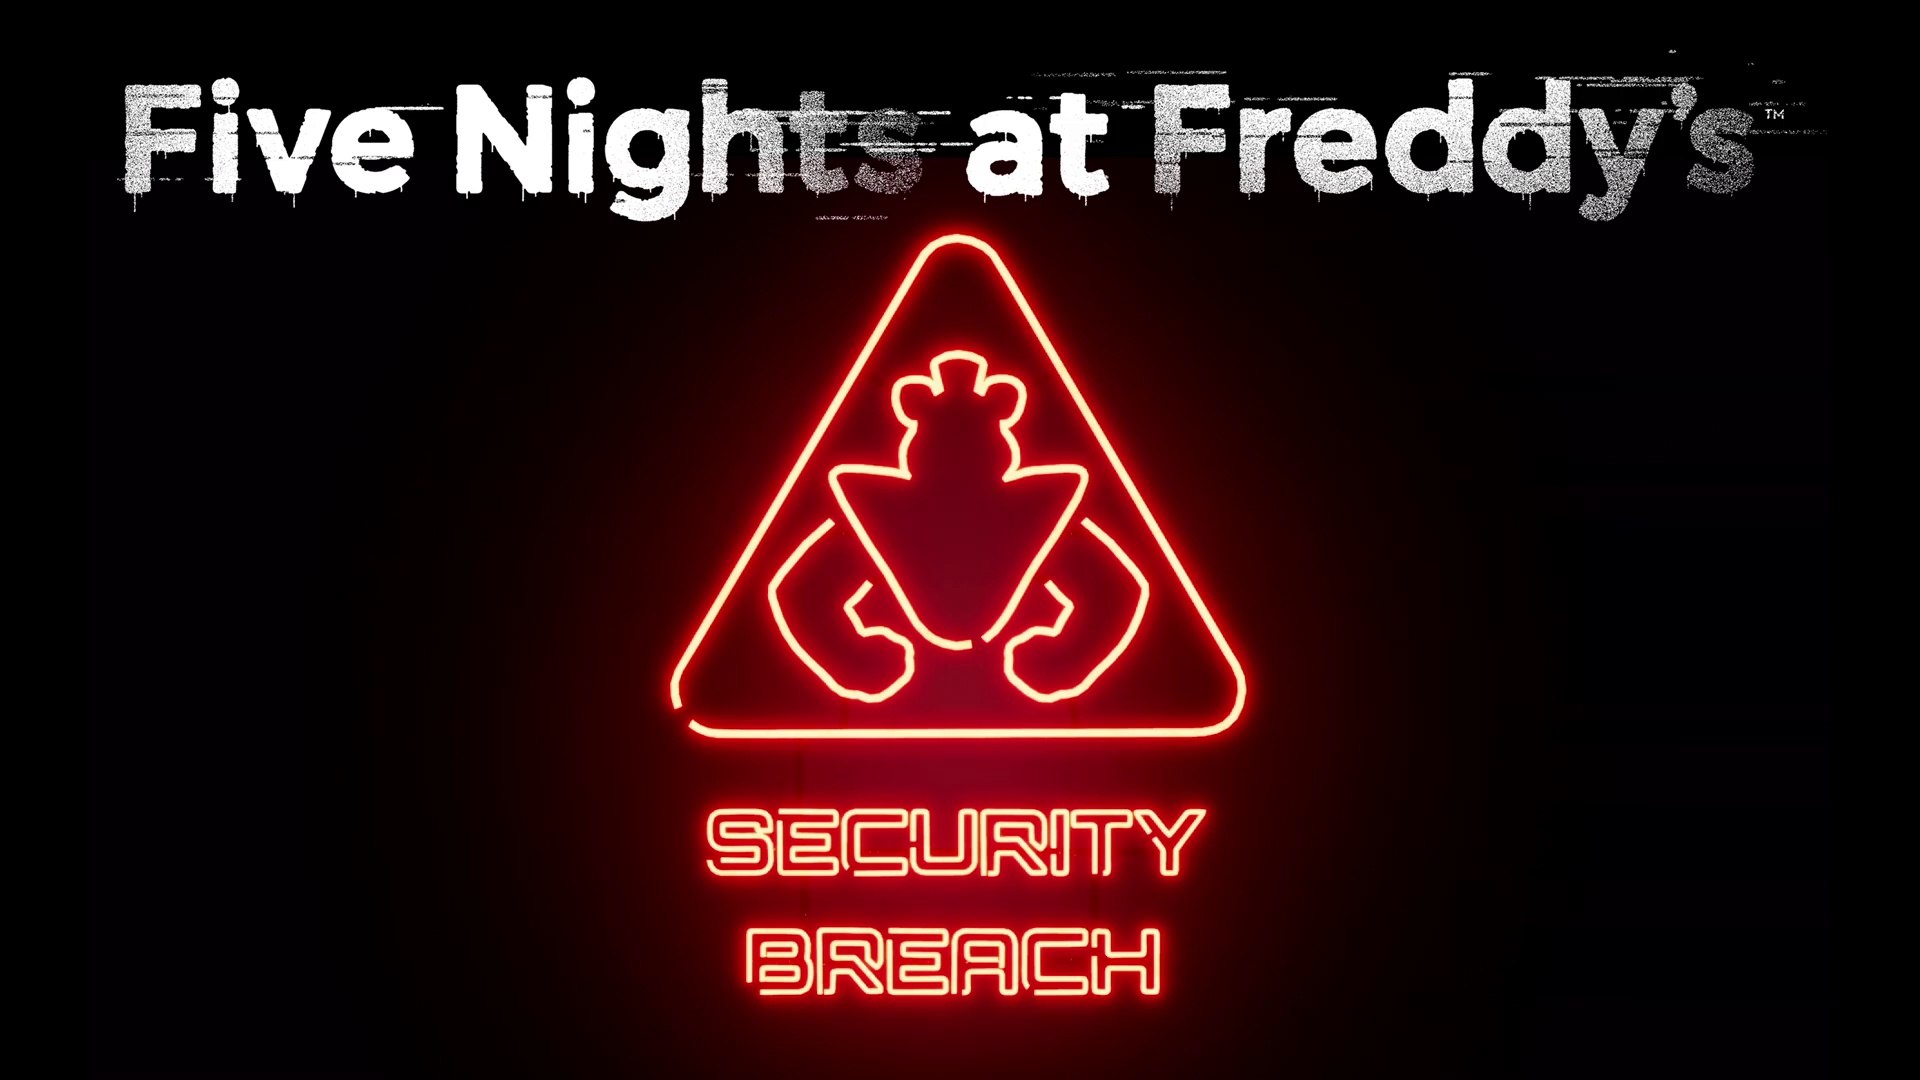 five nights at freddy's: security breach, video game, logo, five nights at freddy's